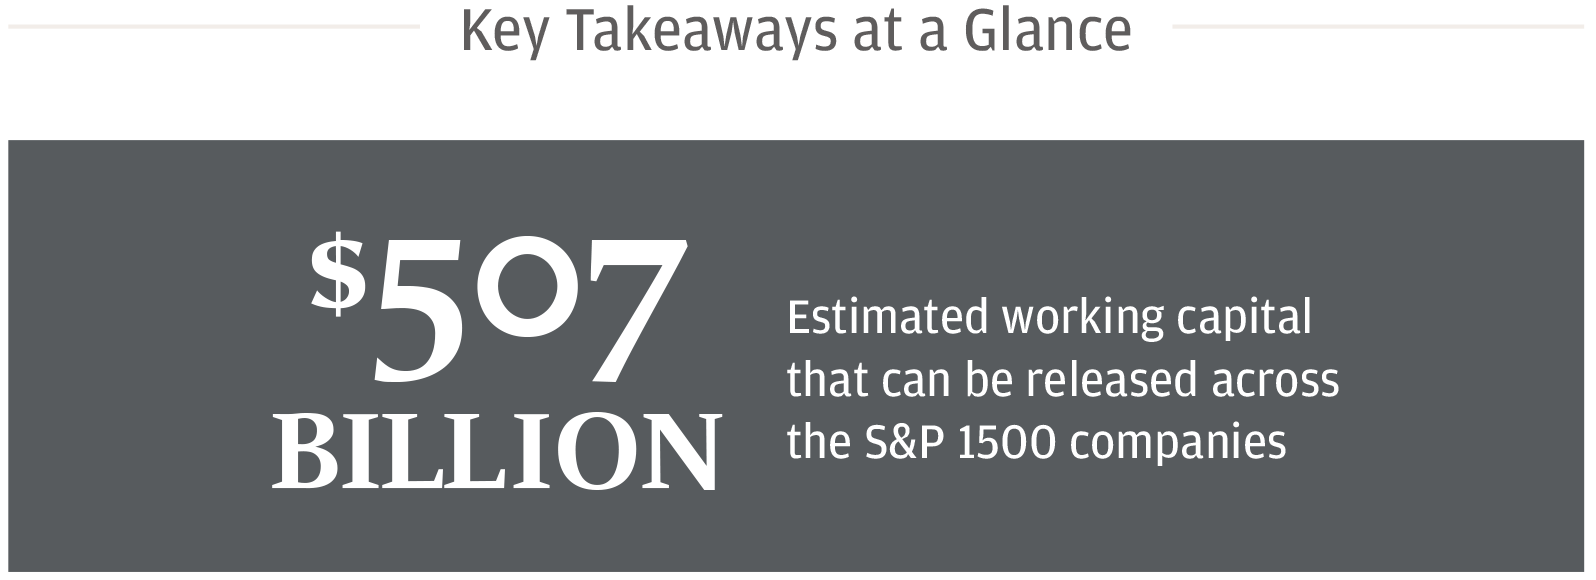 $507 billion: Estimated working capital that can be release across the S&P 1500 companies.